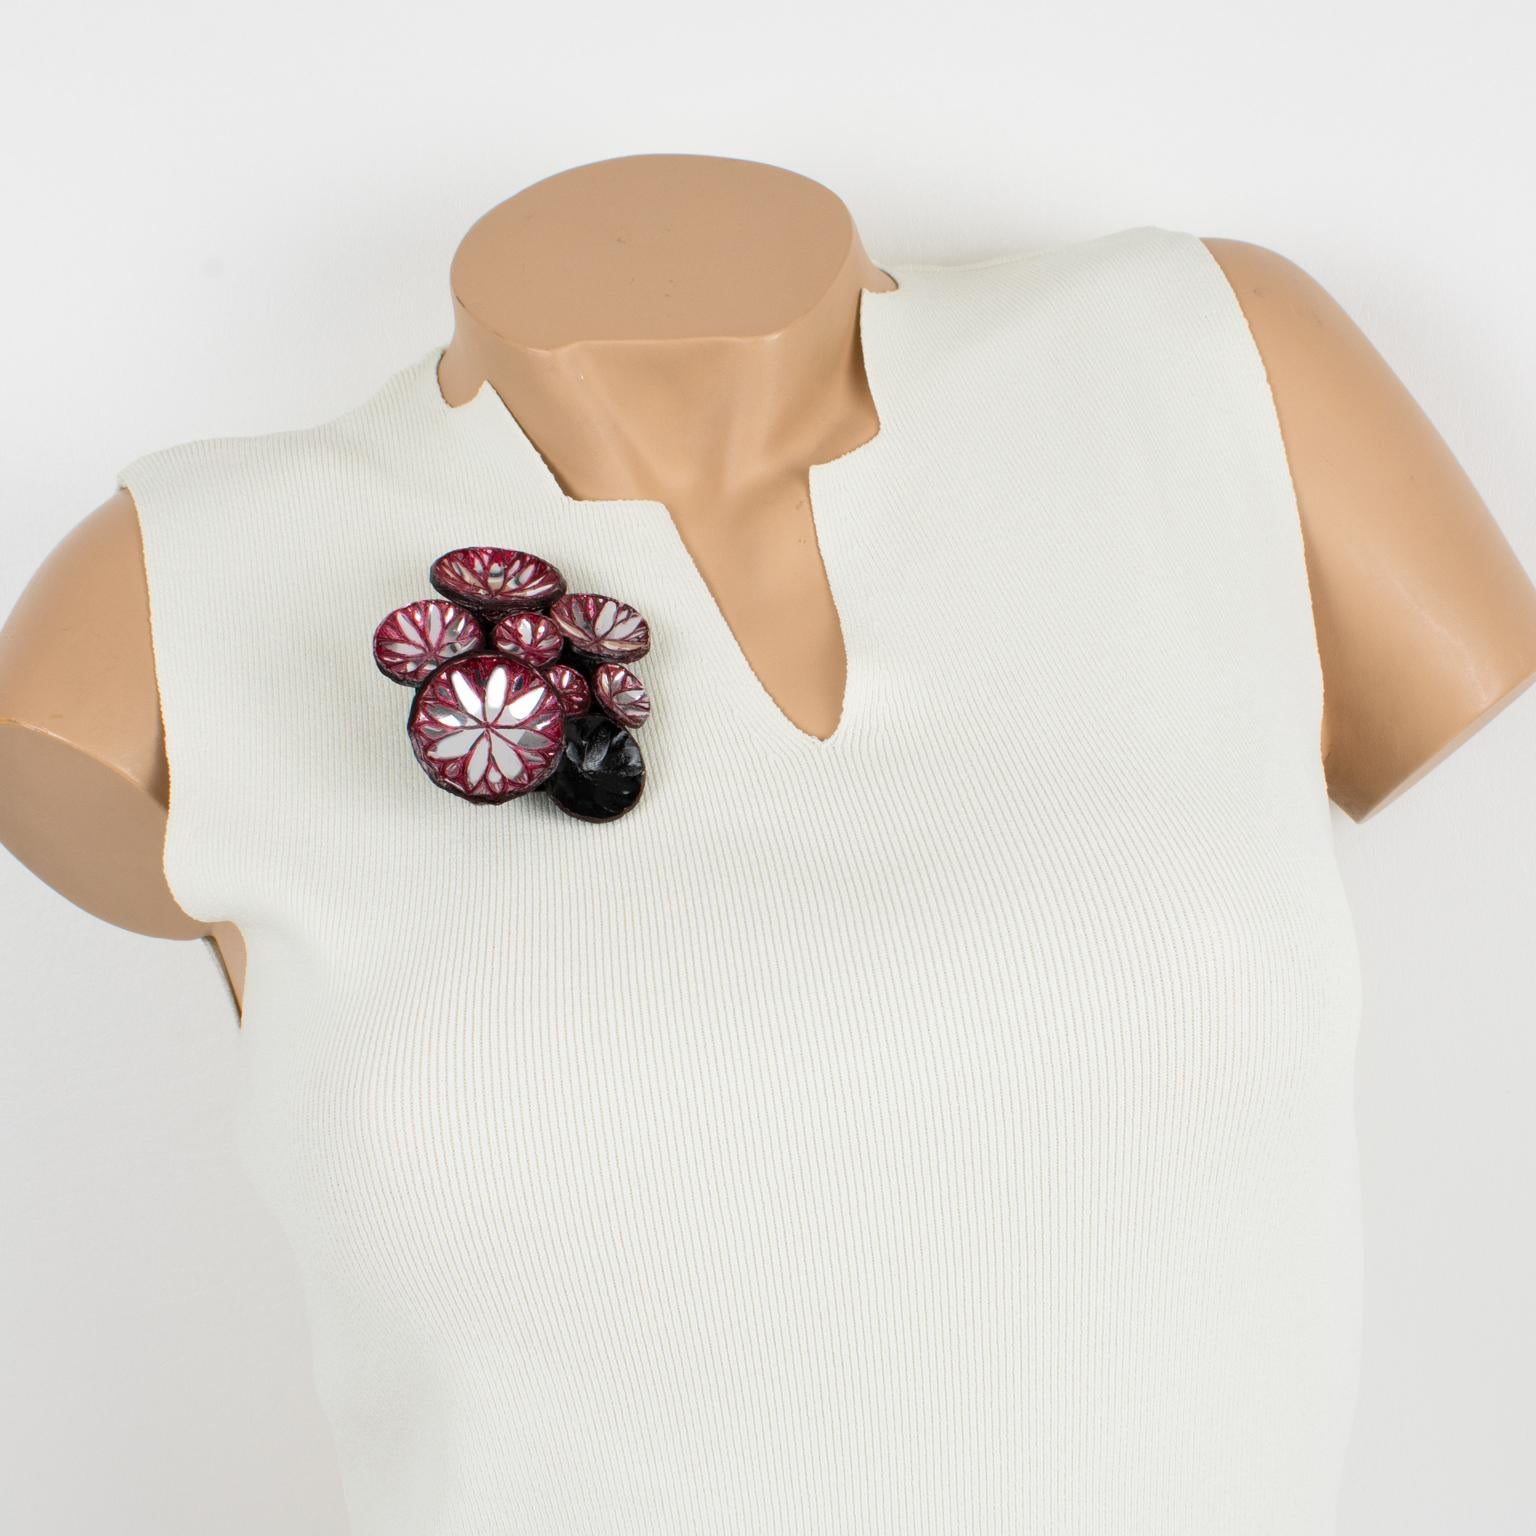 Lovely, light, and easy to wear, this handmade artisanal pin brooch was made in Paris by Cilea. Concave black resin discs embellished with metallic silver leaf and purple-pink application clustered together to form a powerful statement piece. A